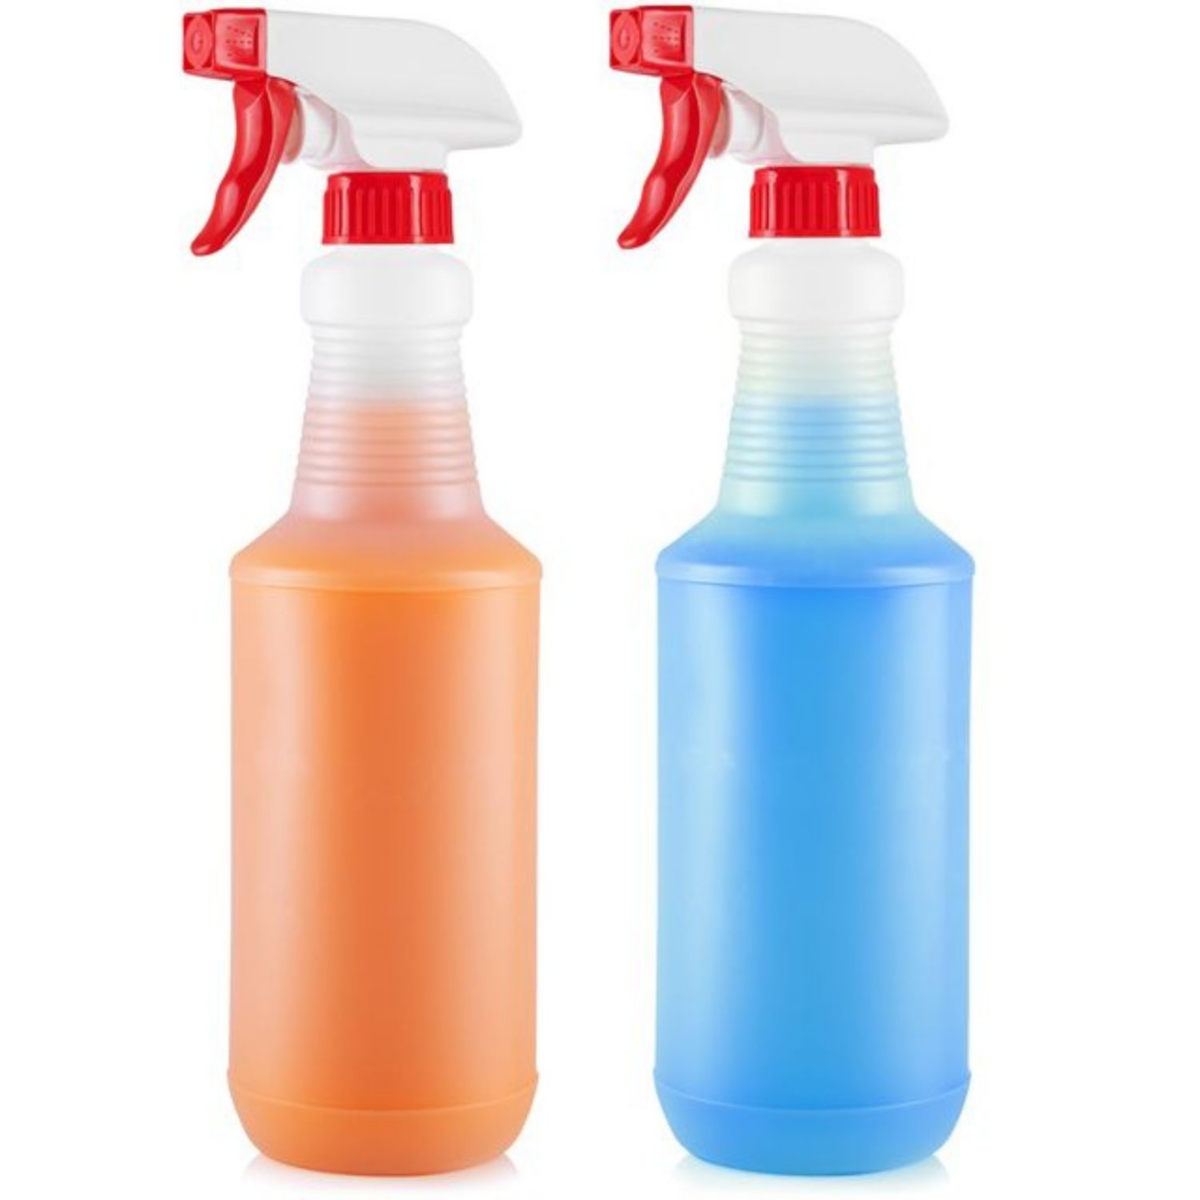 Leakproof Cleaning Spray Bottle Set (2 Pack 16oz) - Red